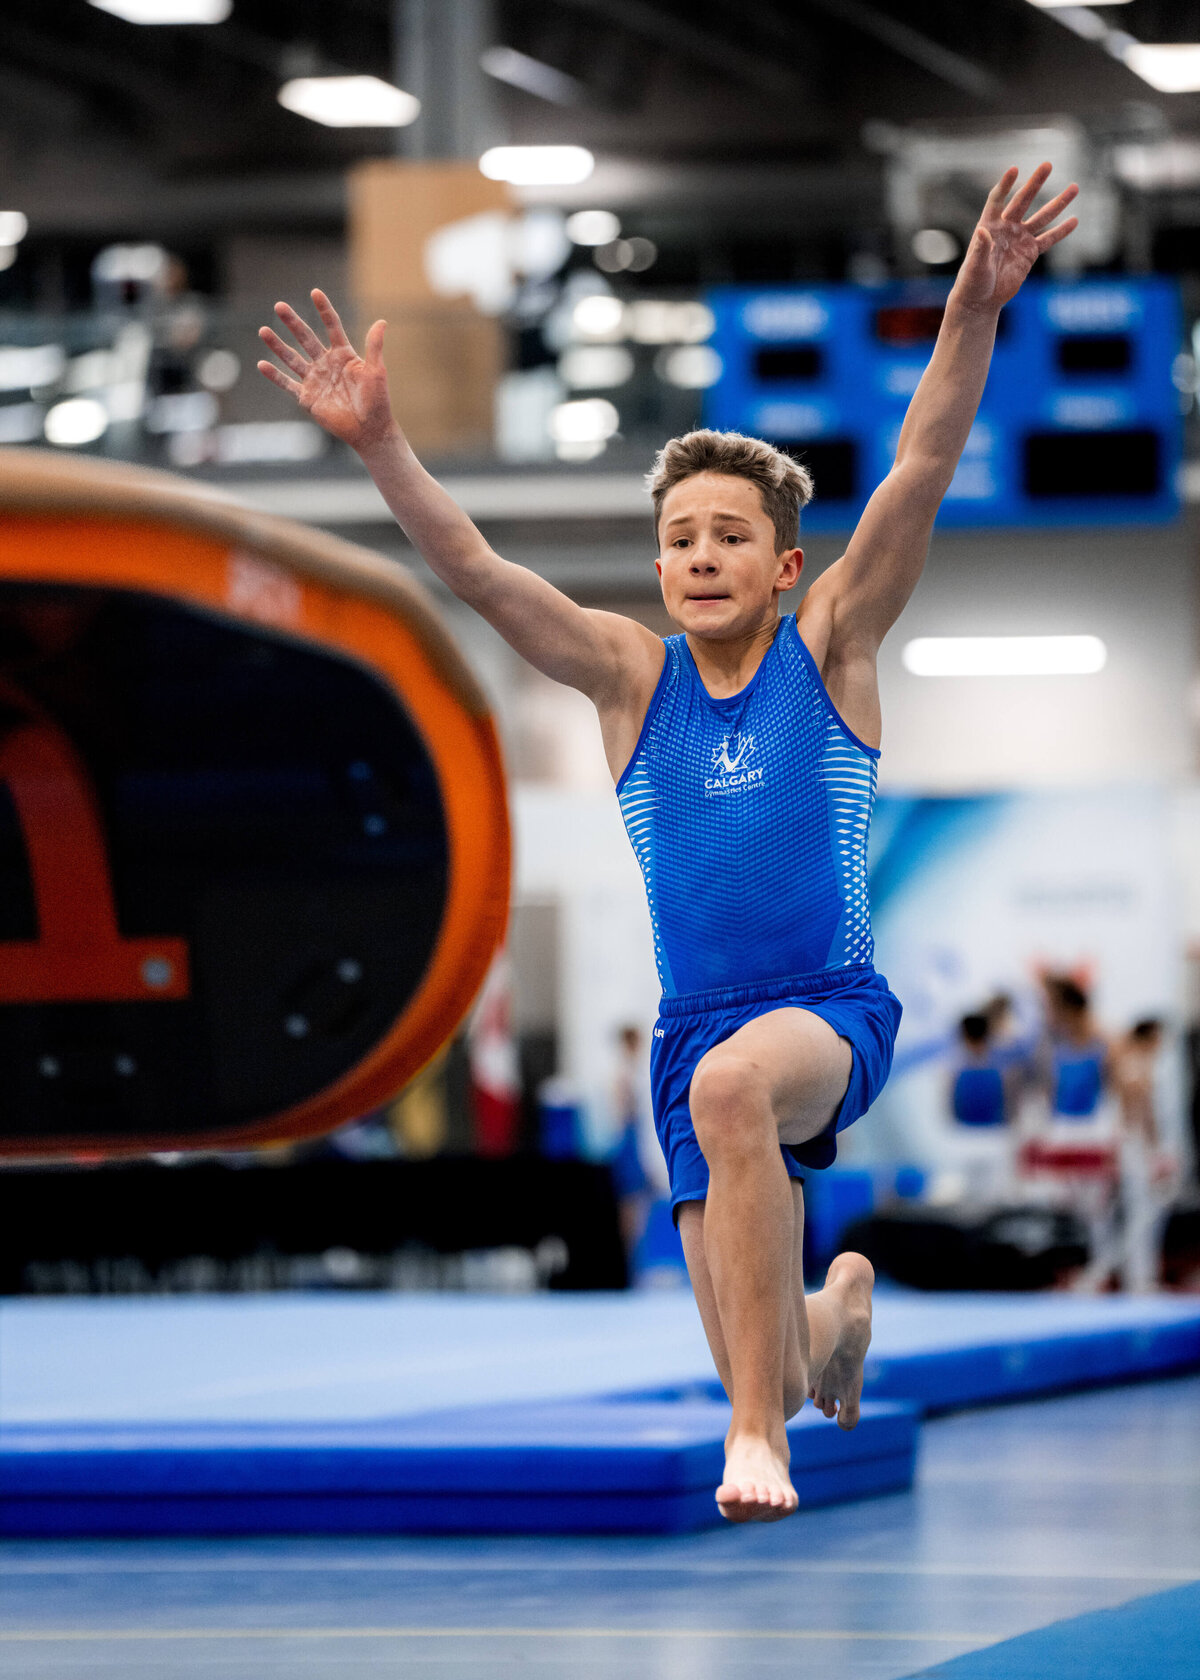 Photo by Luke O'Geil taken at the 2023 inaugural Grizzly Classic men's artistic gymnastics competitionA1_01694